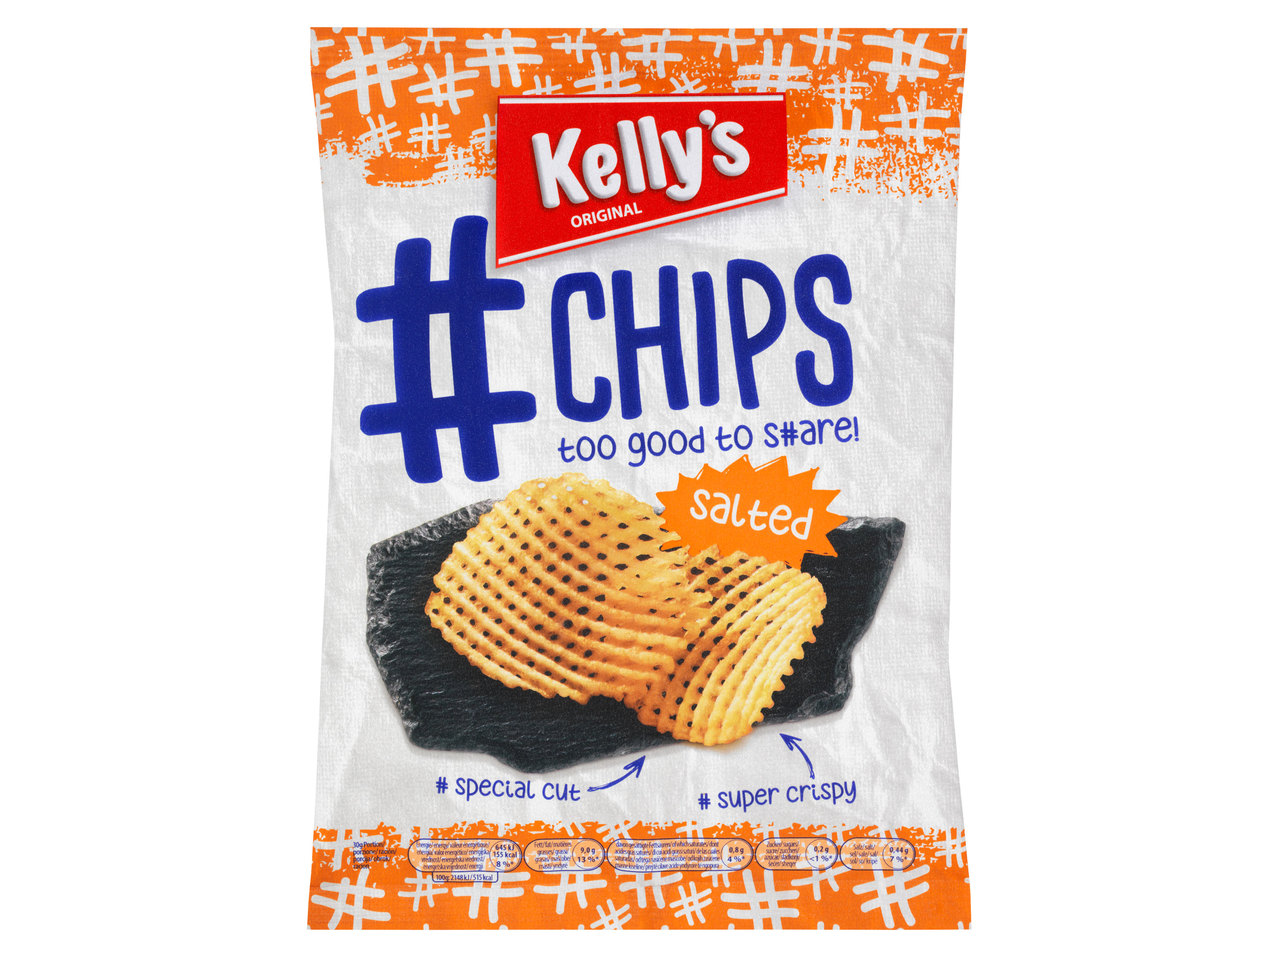 KELLY‘S Hashtag Chips